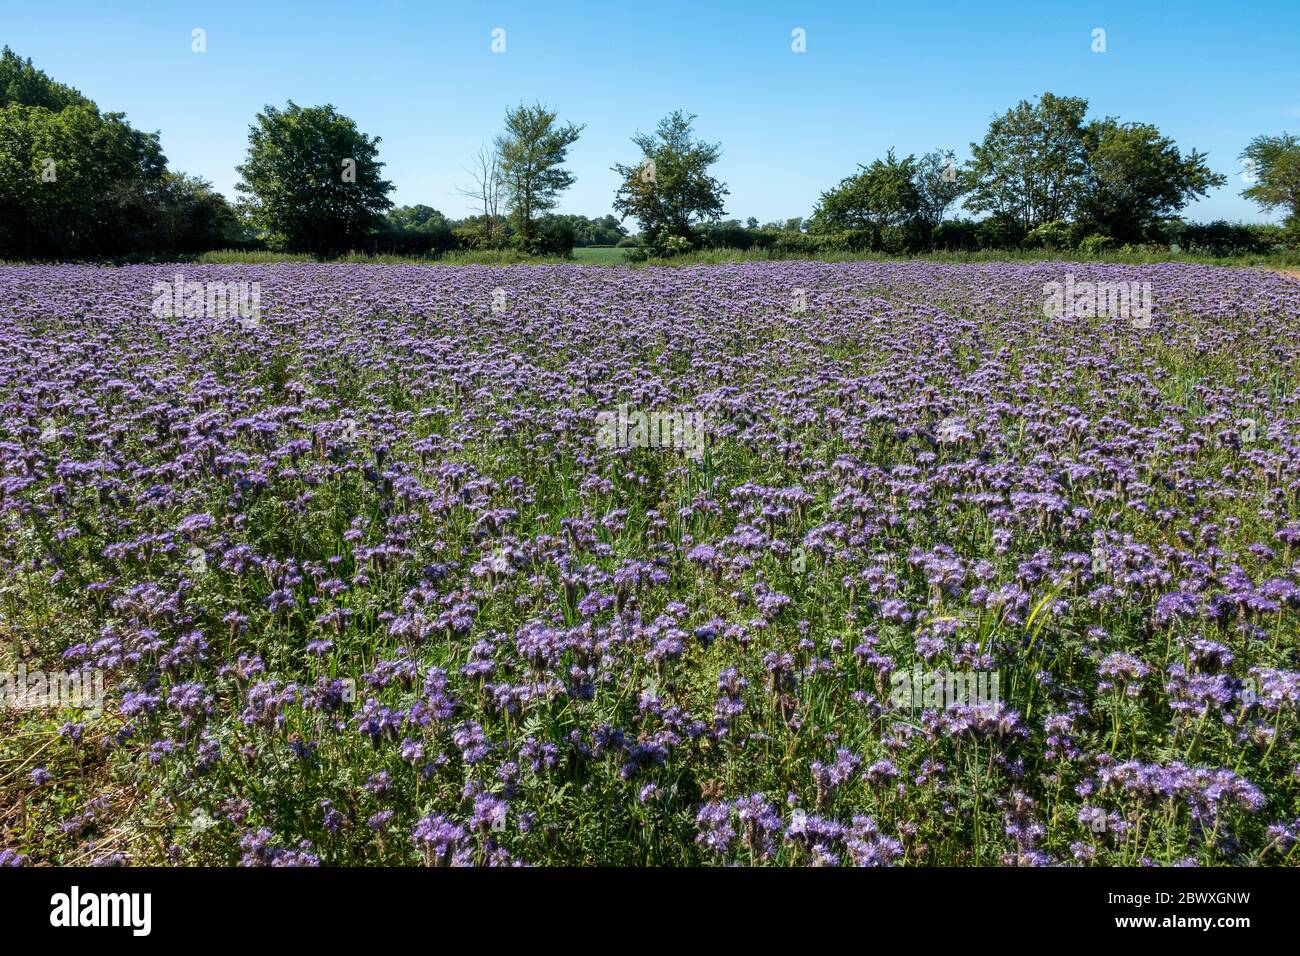 A field of Phacelia presenting a solid purple field with a hedge and tree border in the distance with a blue sky Stock Photo